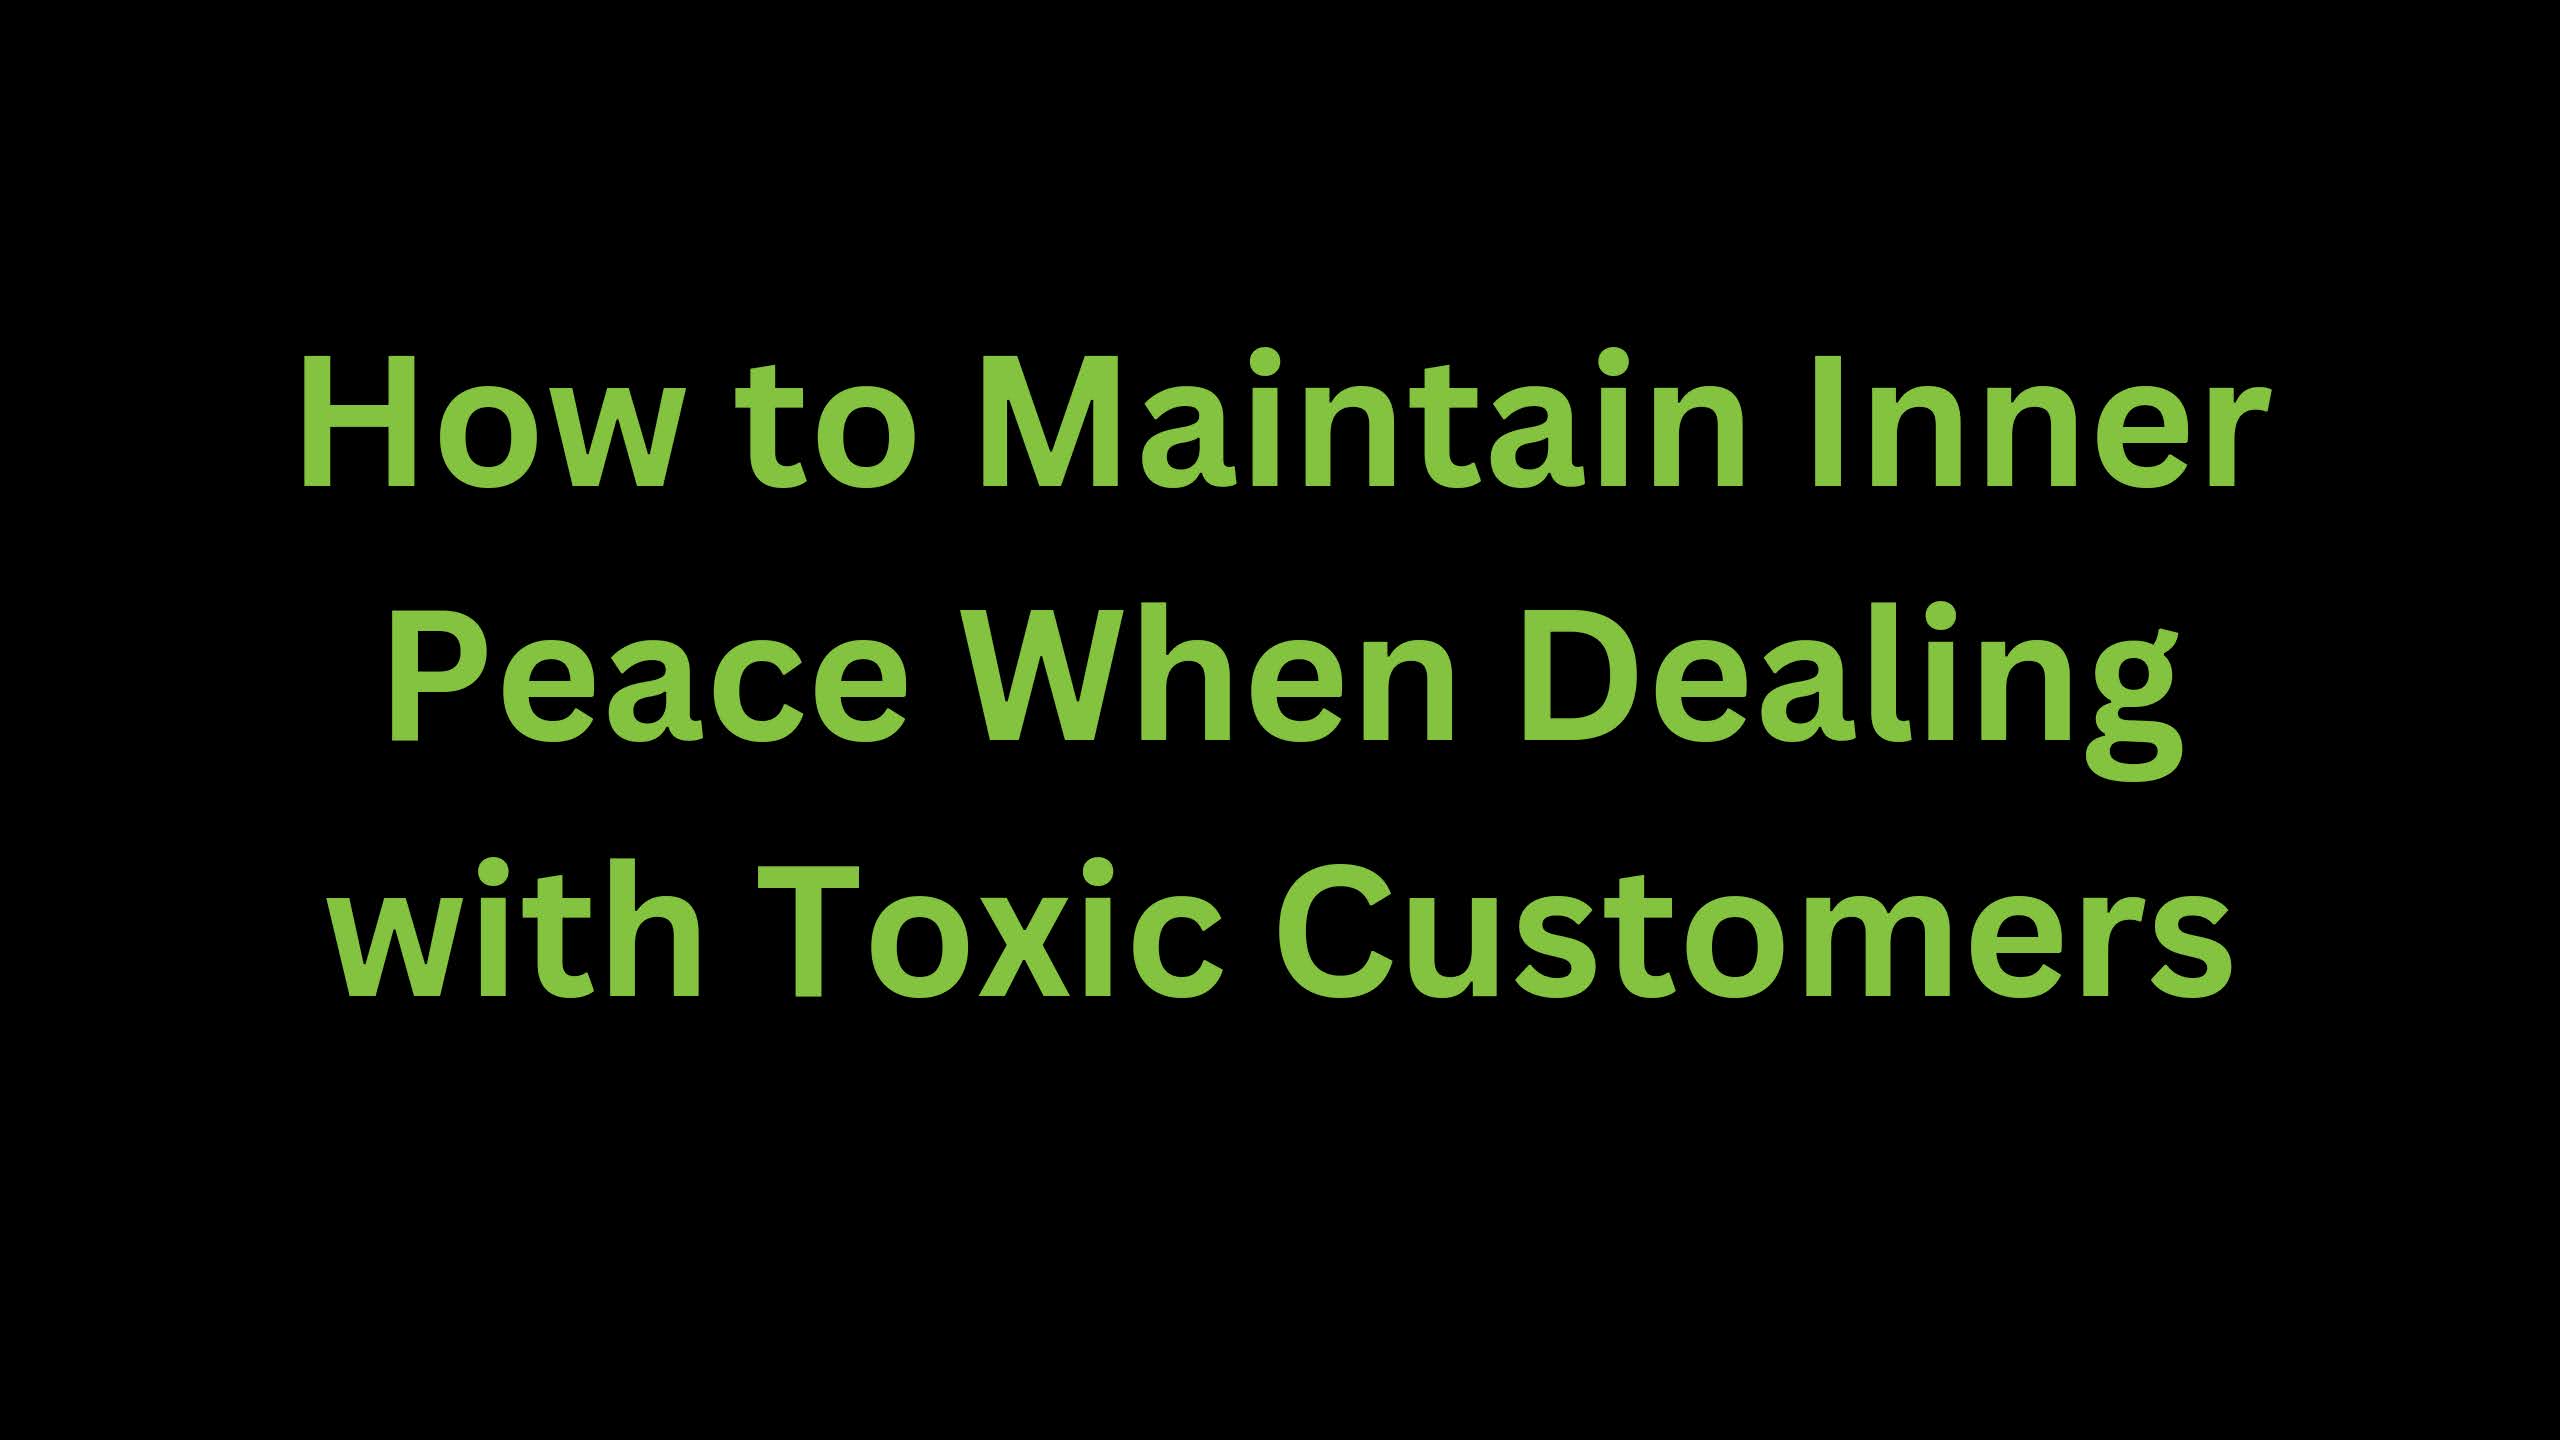 You are currently viewing Maintaining Inner Peace When Dealing with Toxic Customers